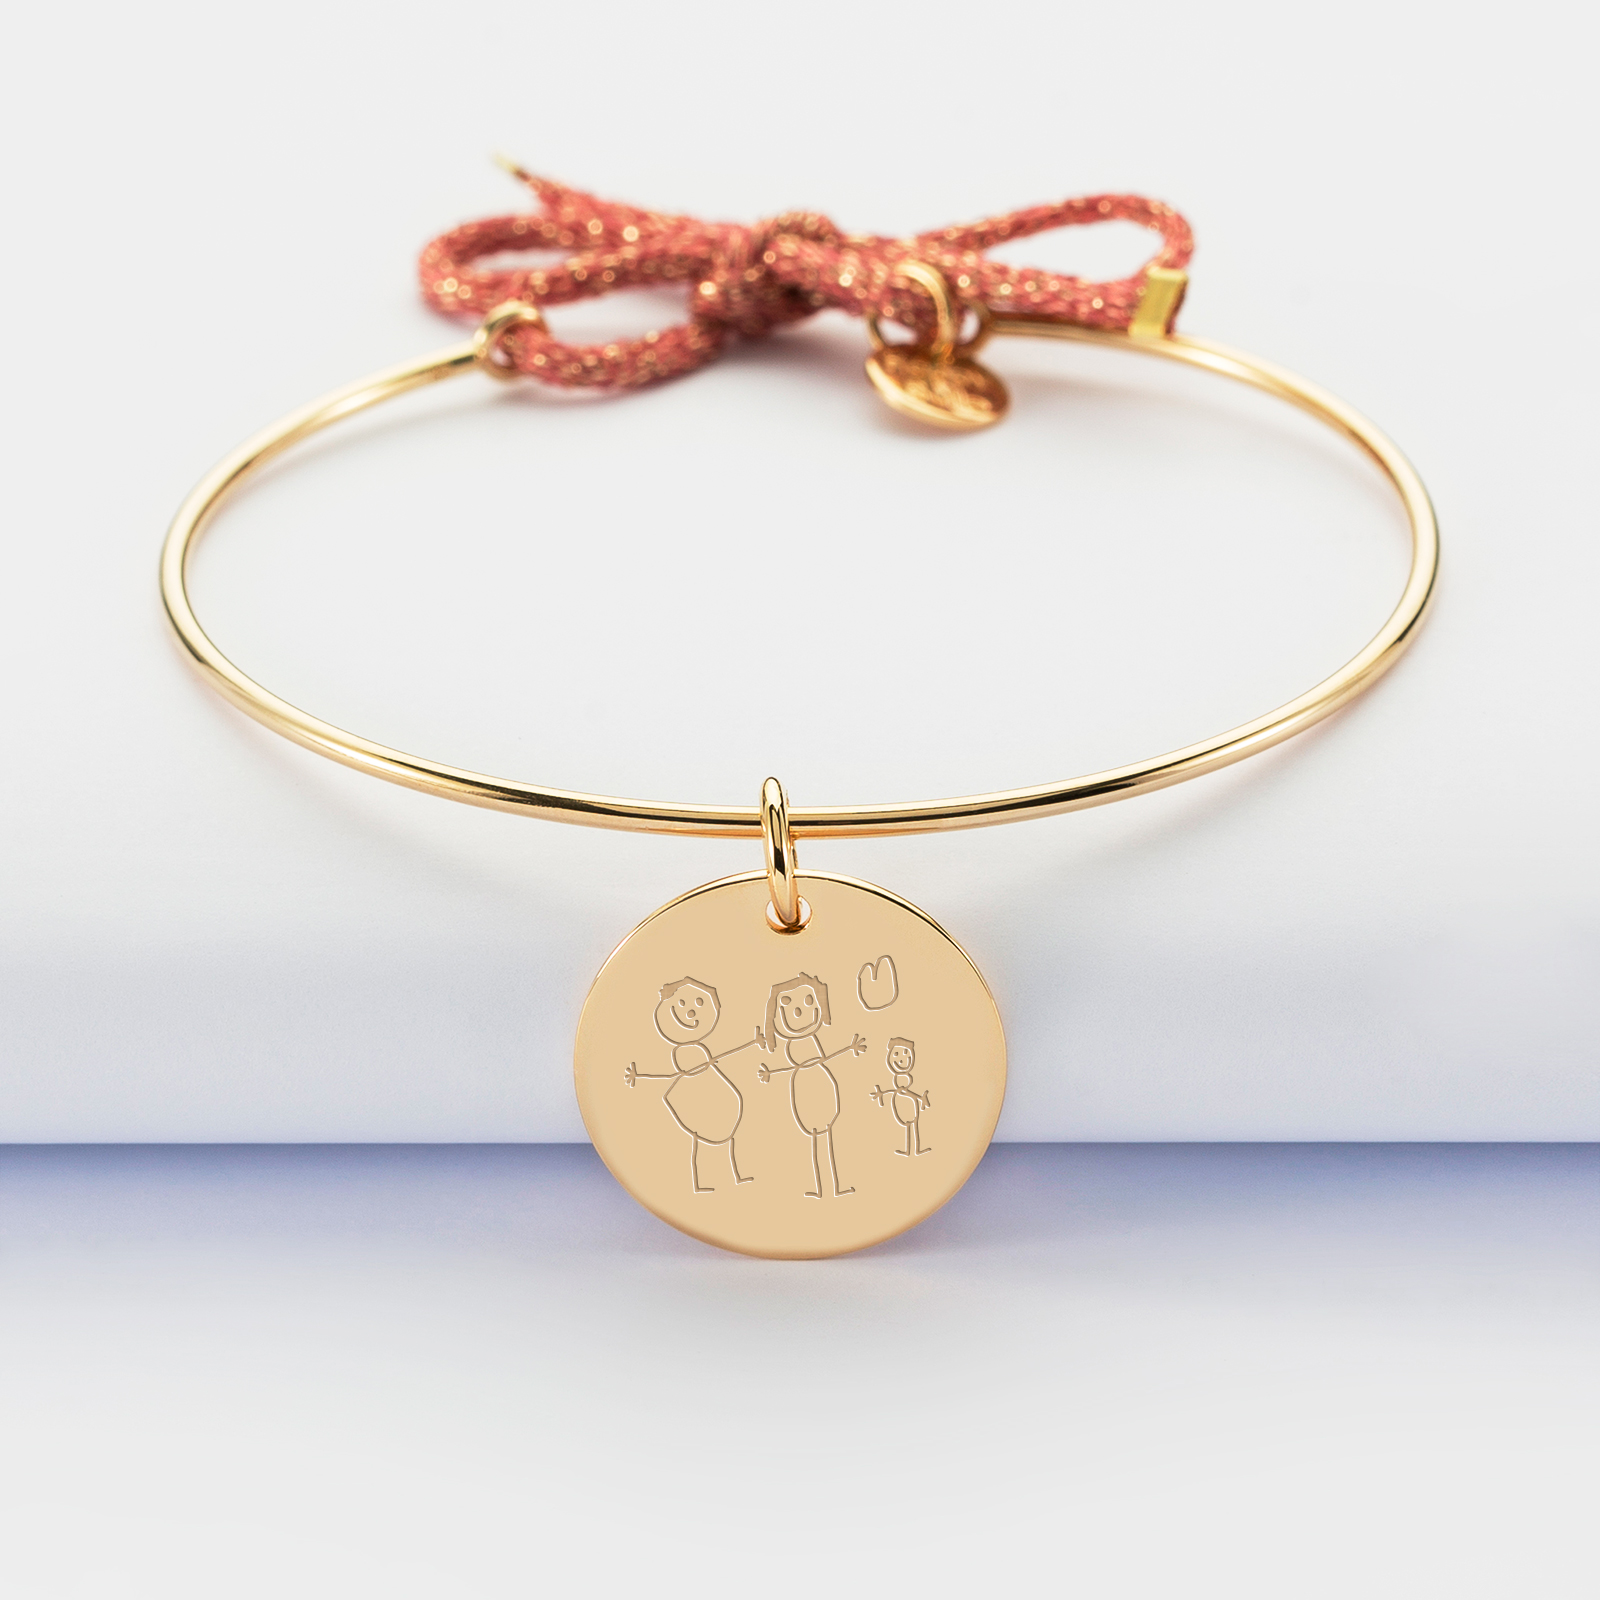 Personalised gold plate bangle with sparkly cord and 19 mm engraved medallion - sketch